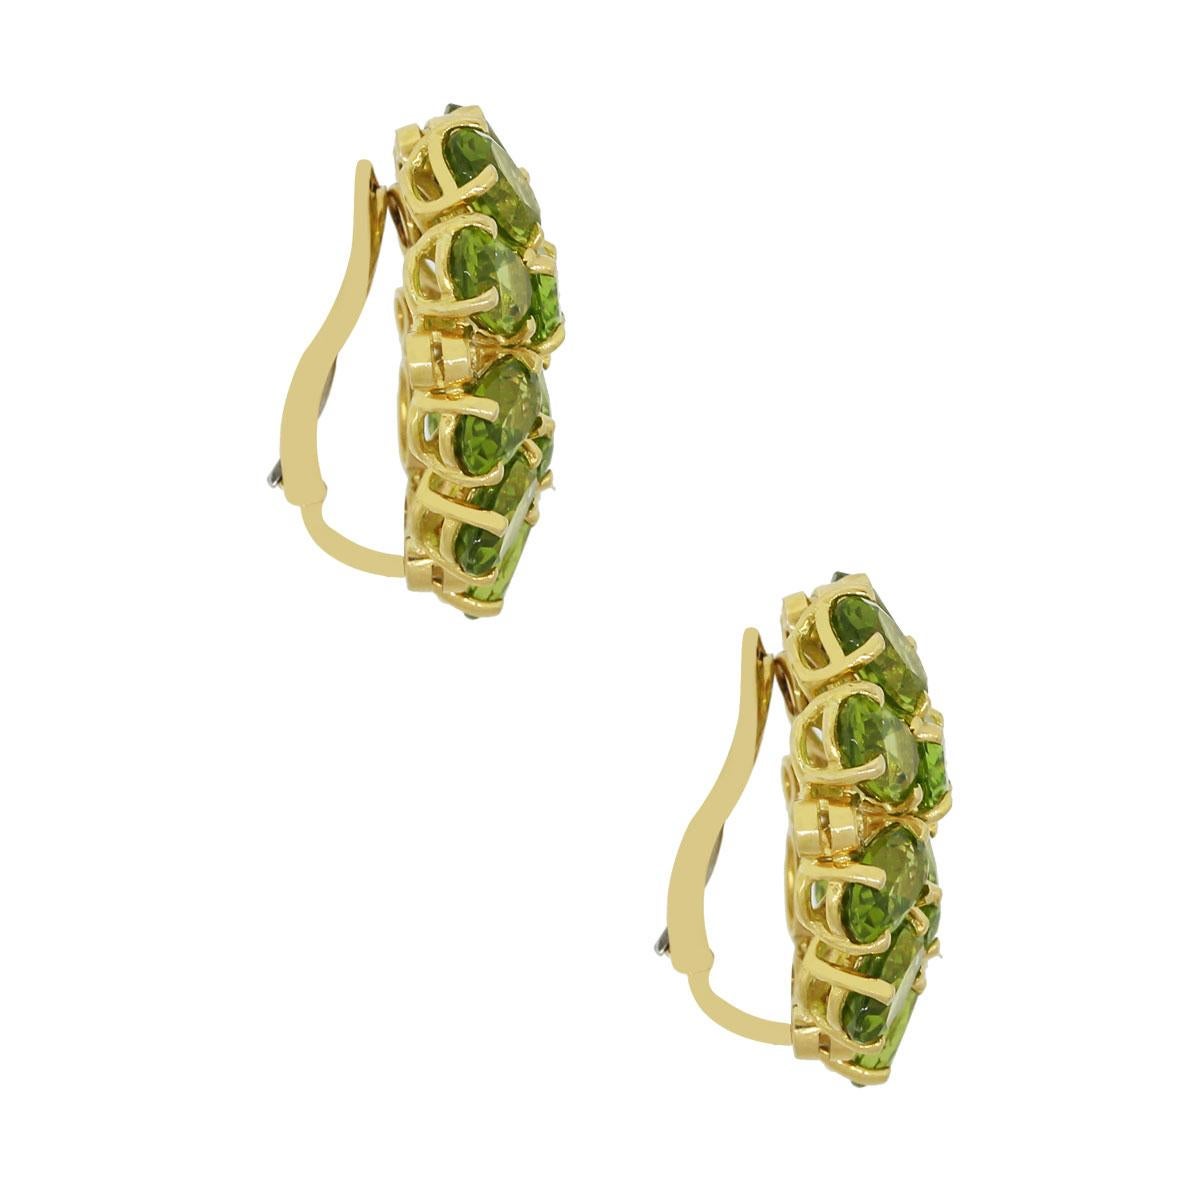 Material: 18k Yellow Gold
Gemstone Details: 20 Oval shape peridot gemstones and 16 small round peridot gemstones
Clasp: Clip on
Total Weight: 22g
Measurements: 1.06″ x 0.54″ x 0.93″
SKU: A30312233